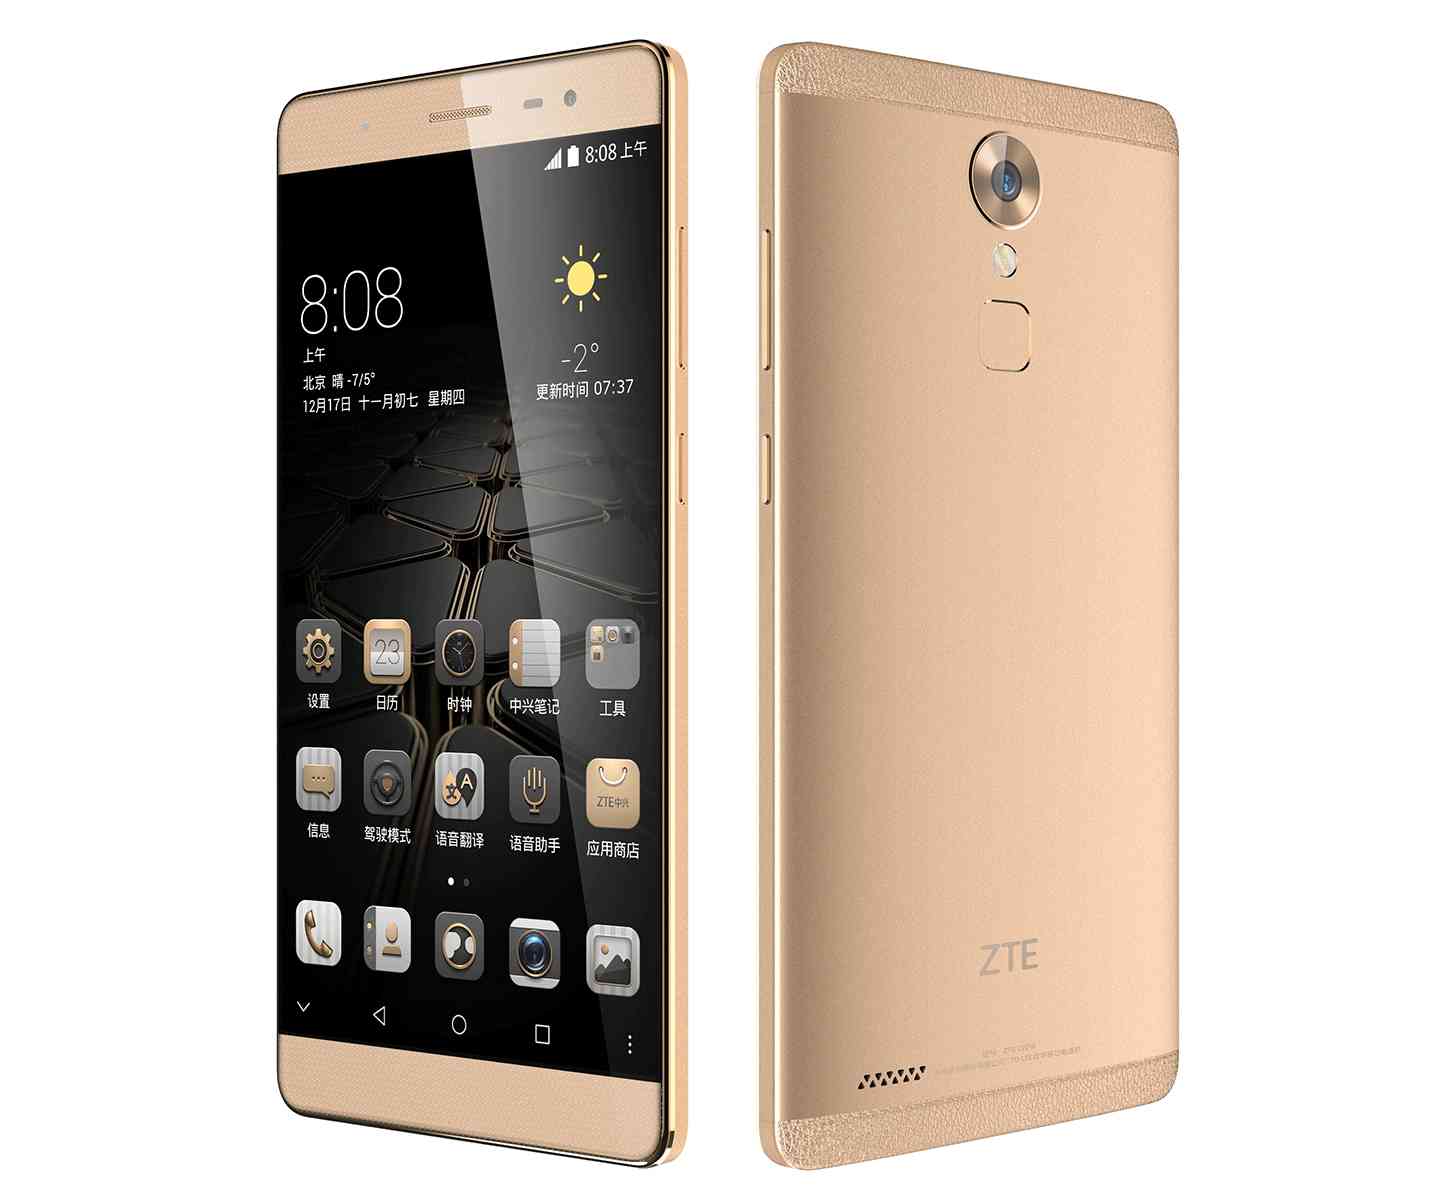 ZTE Axon Max Android phablet official